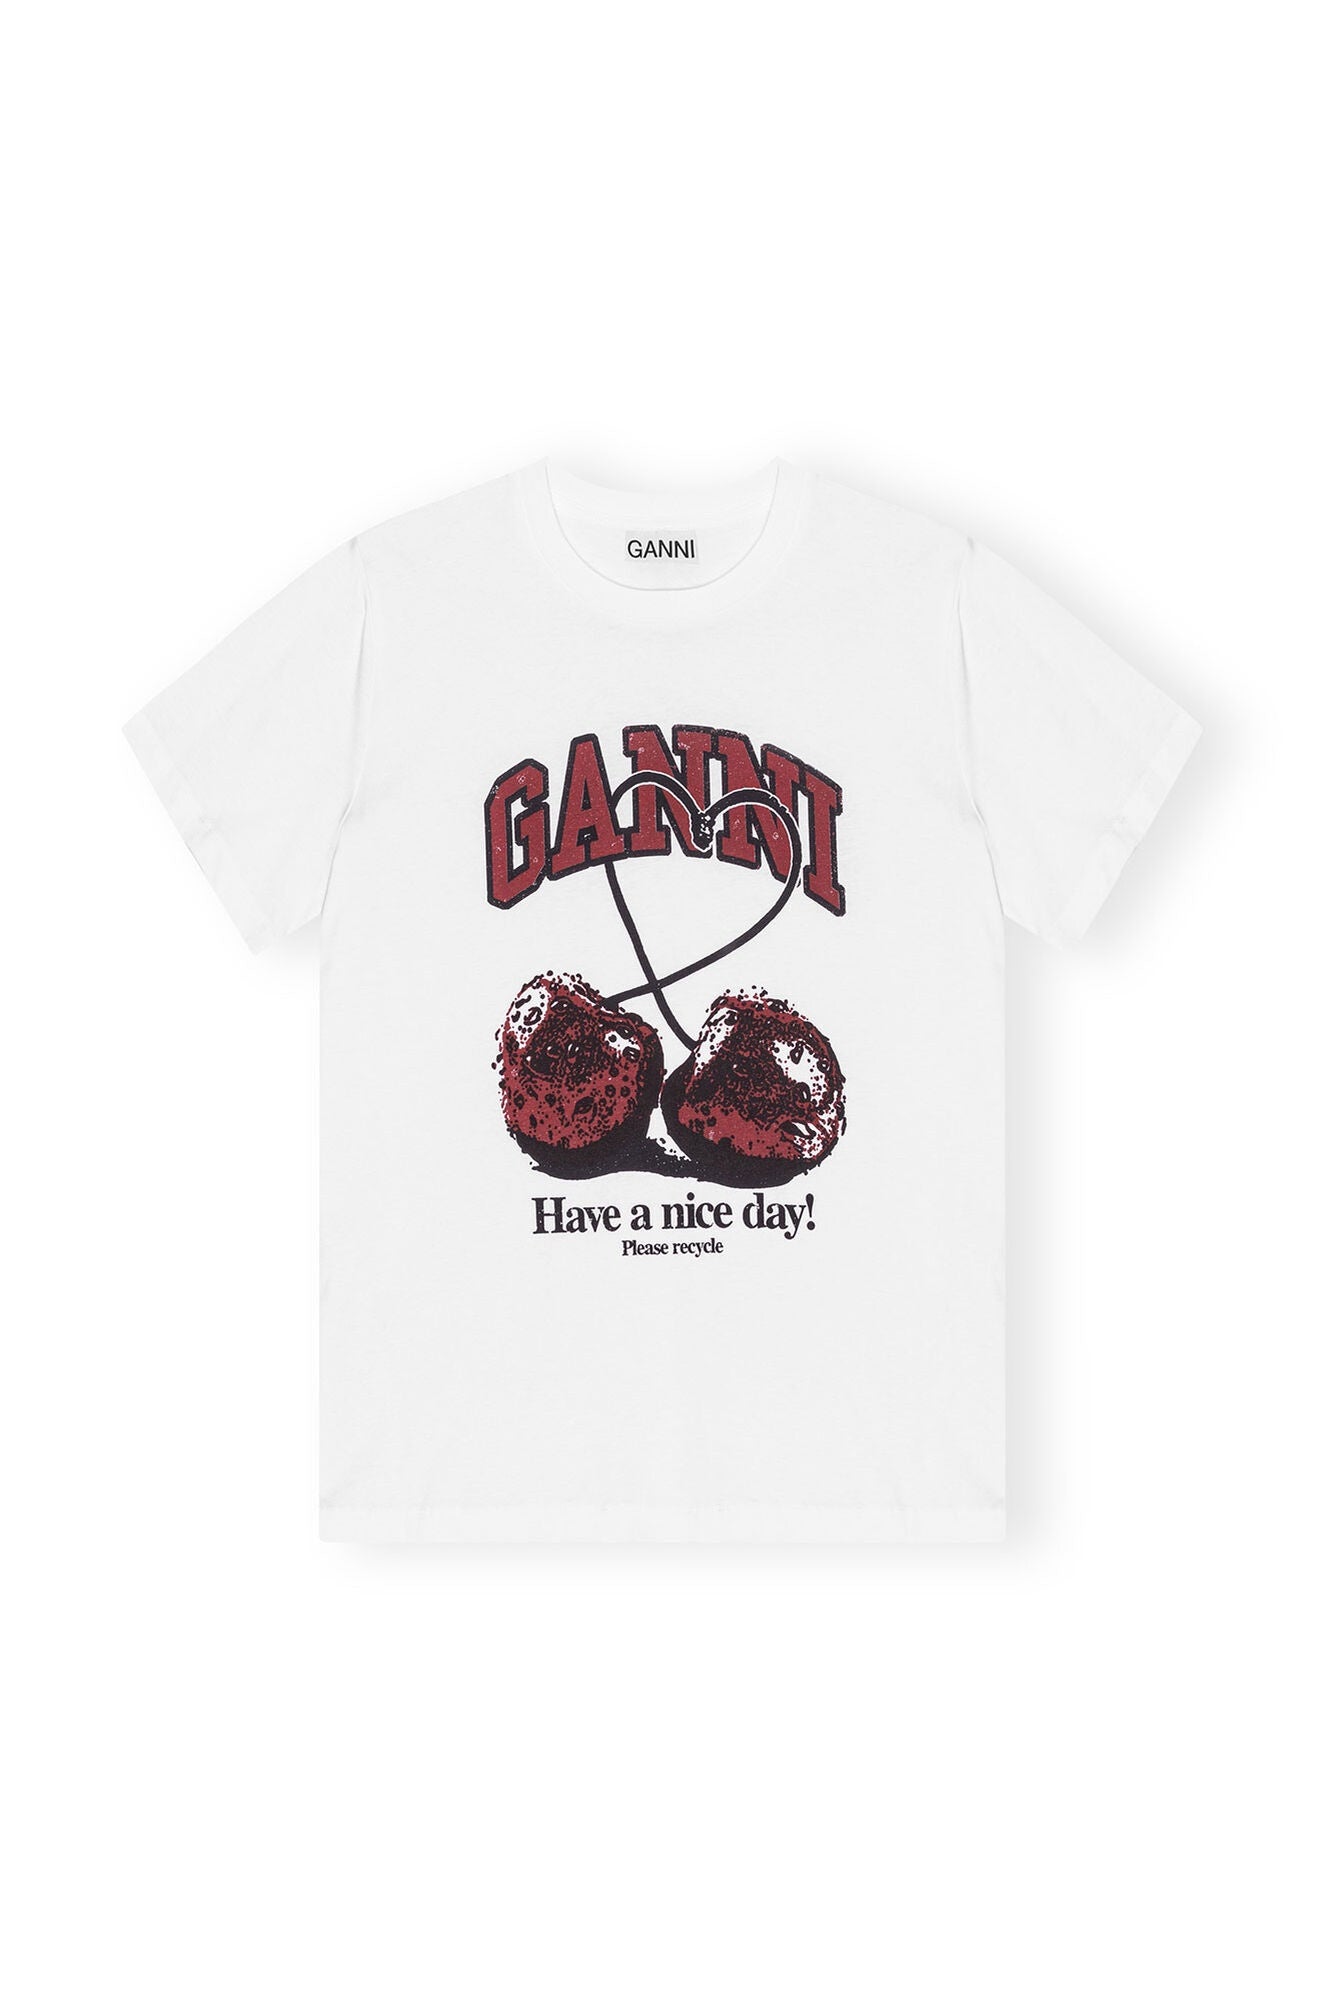 GANNI T3860 Cherry Relaxed Tee in White